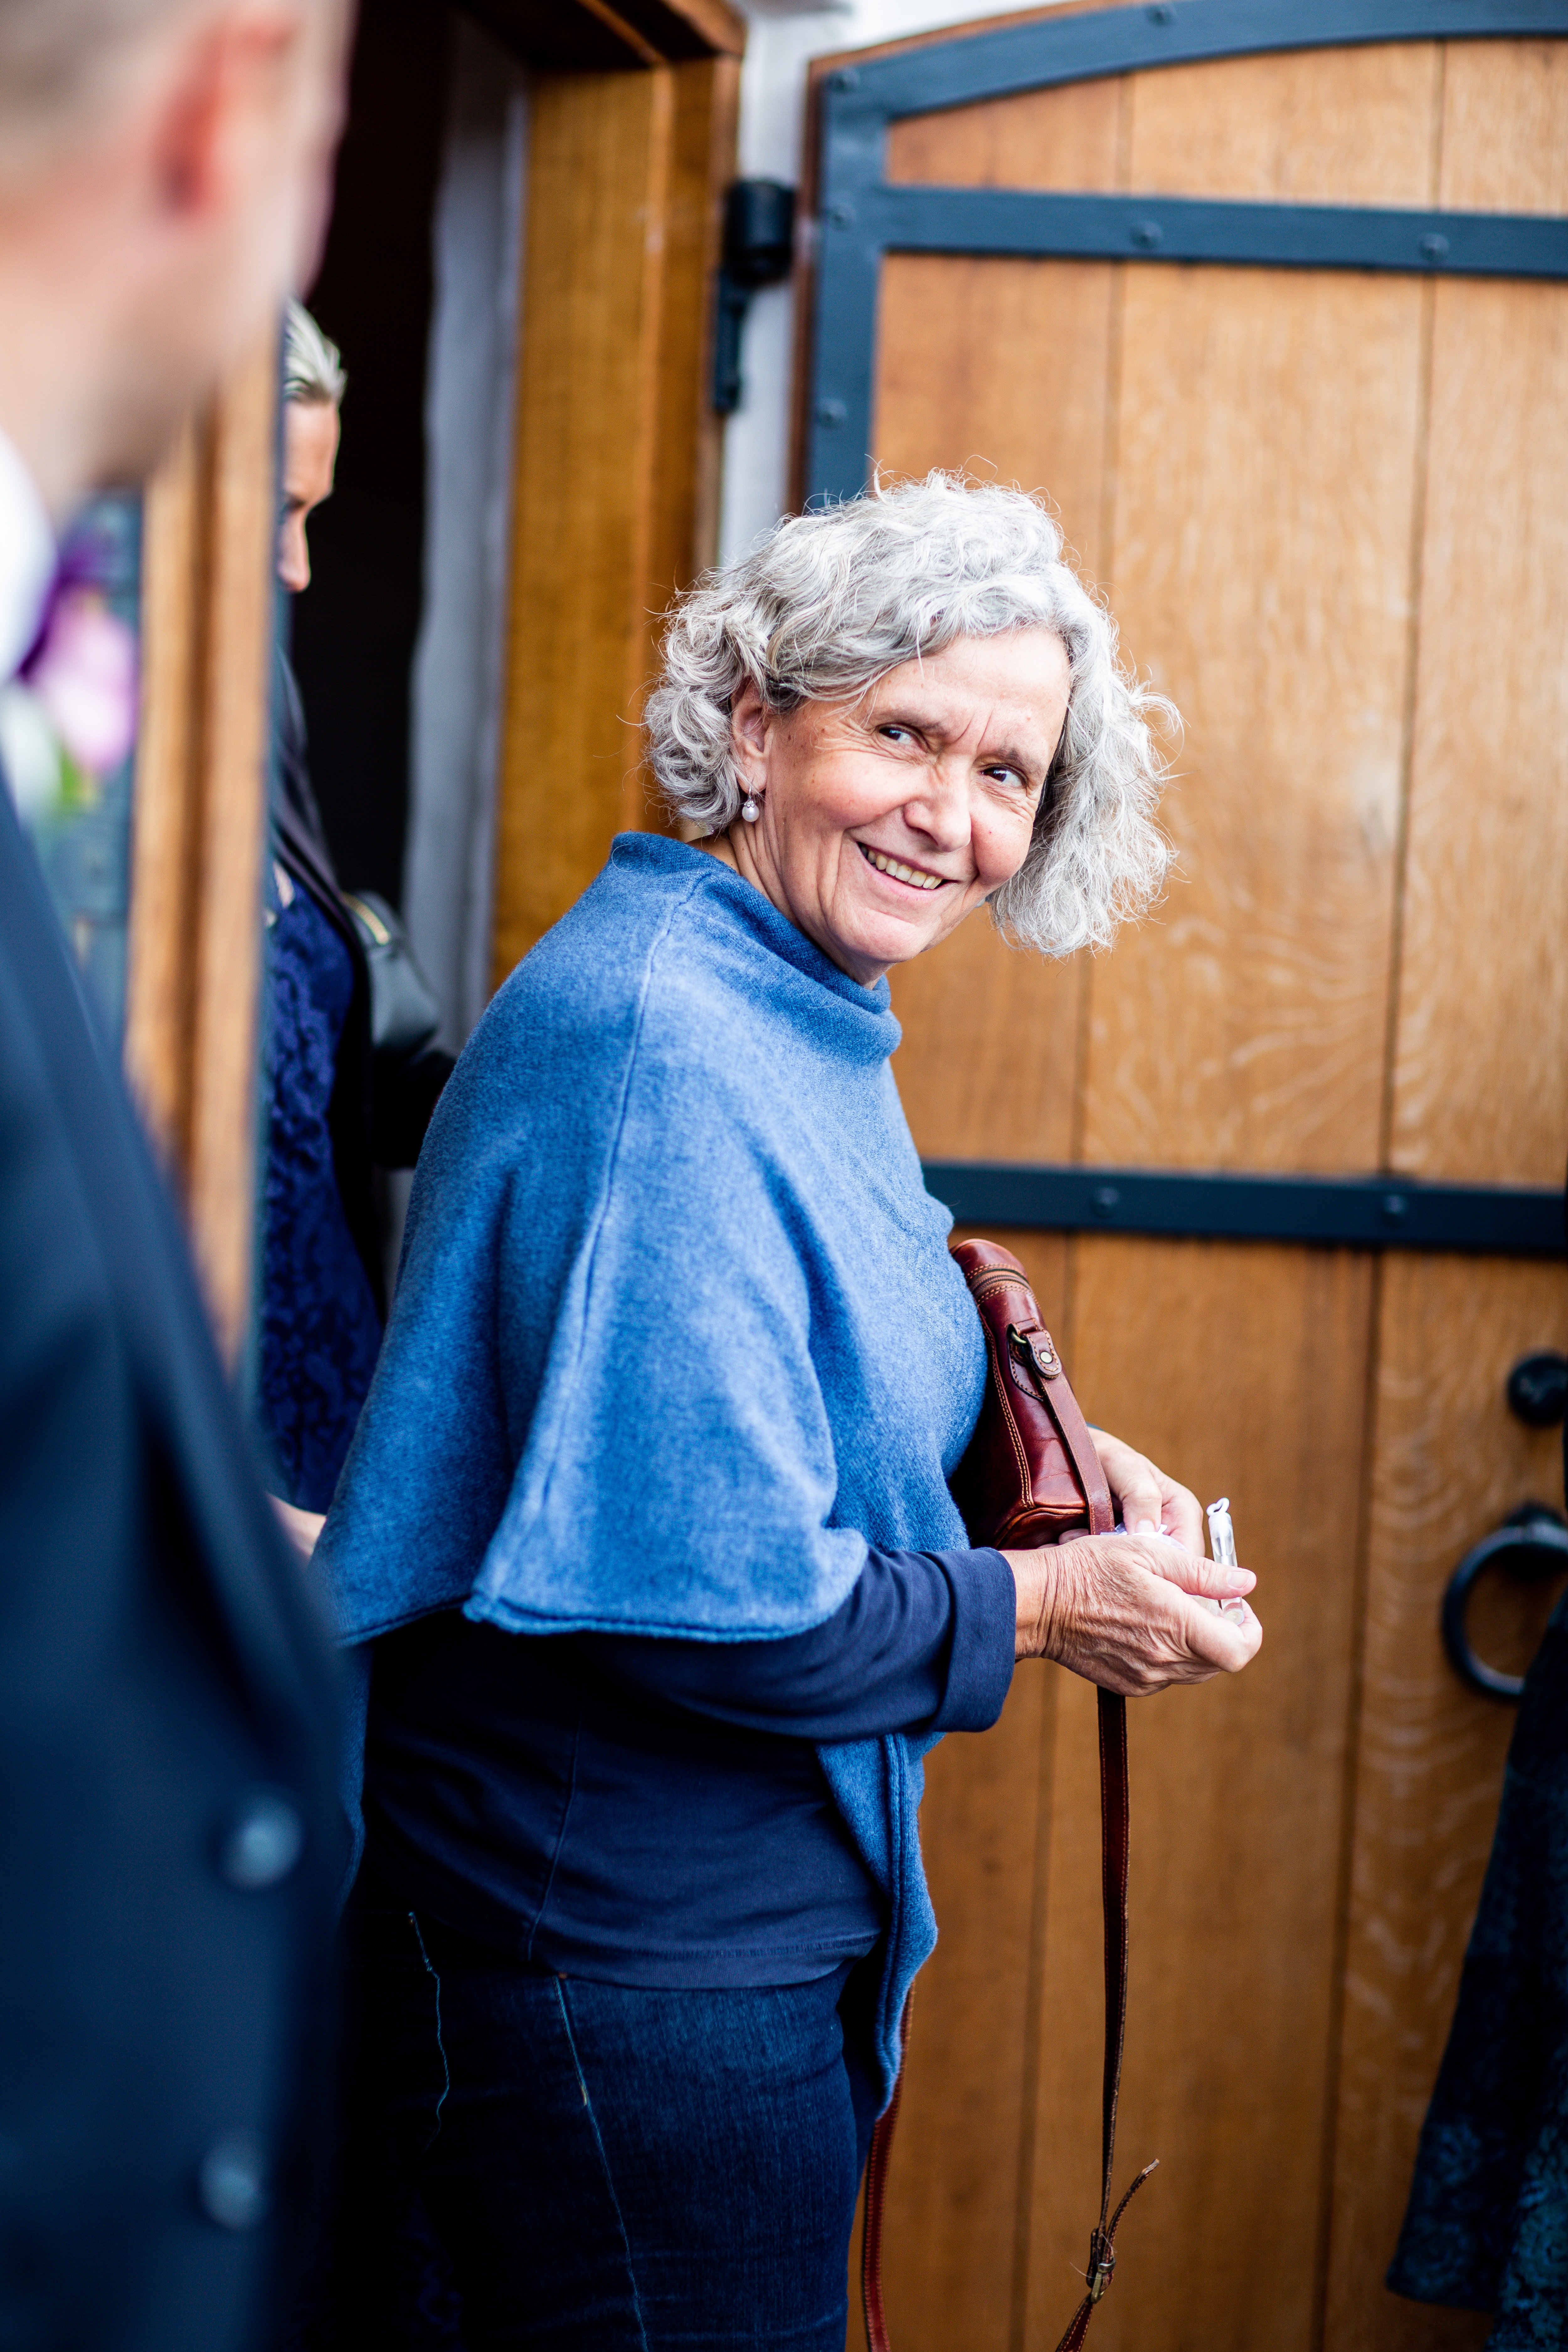 Pictured - A woman wearing a blue sweater carrying a brown leather bag | Source: Pexels 